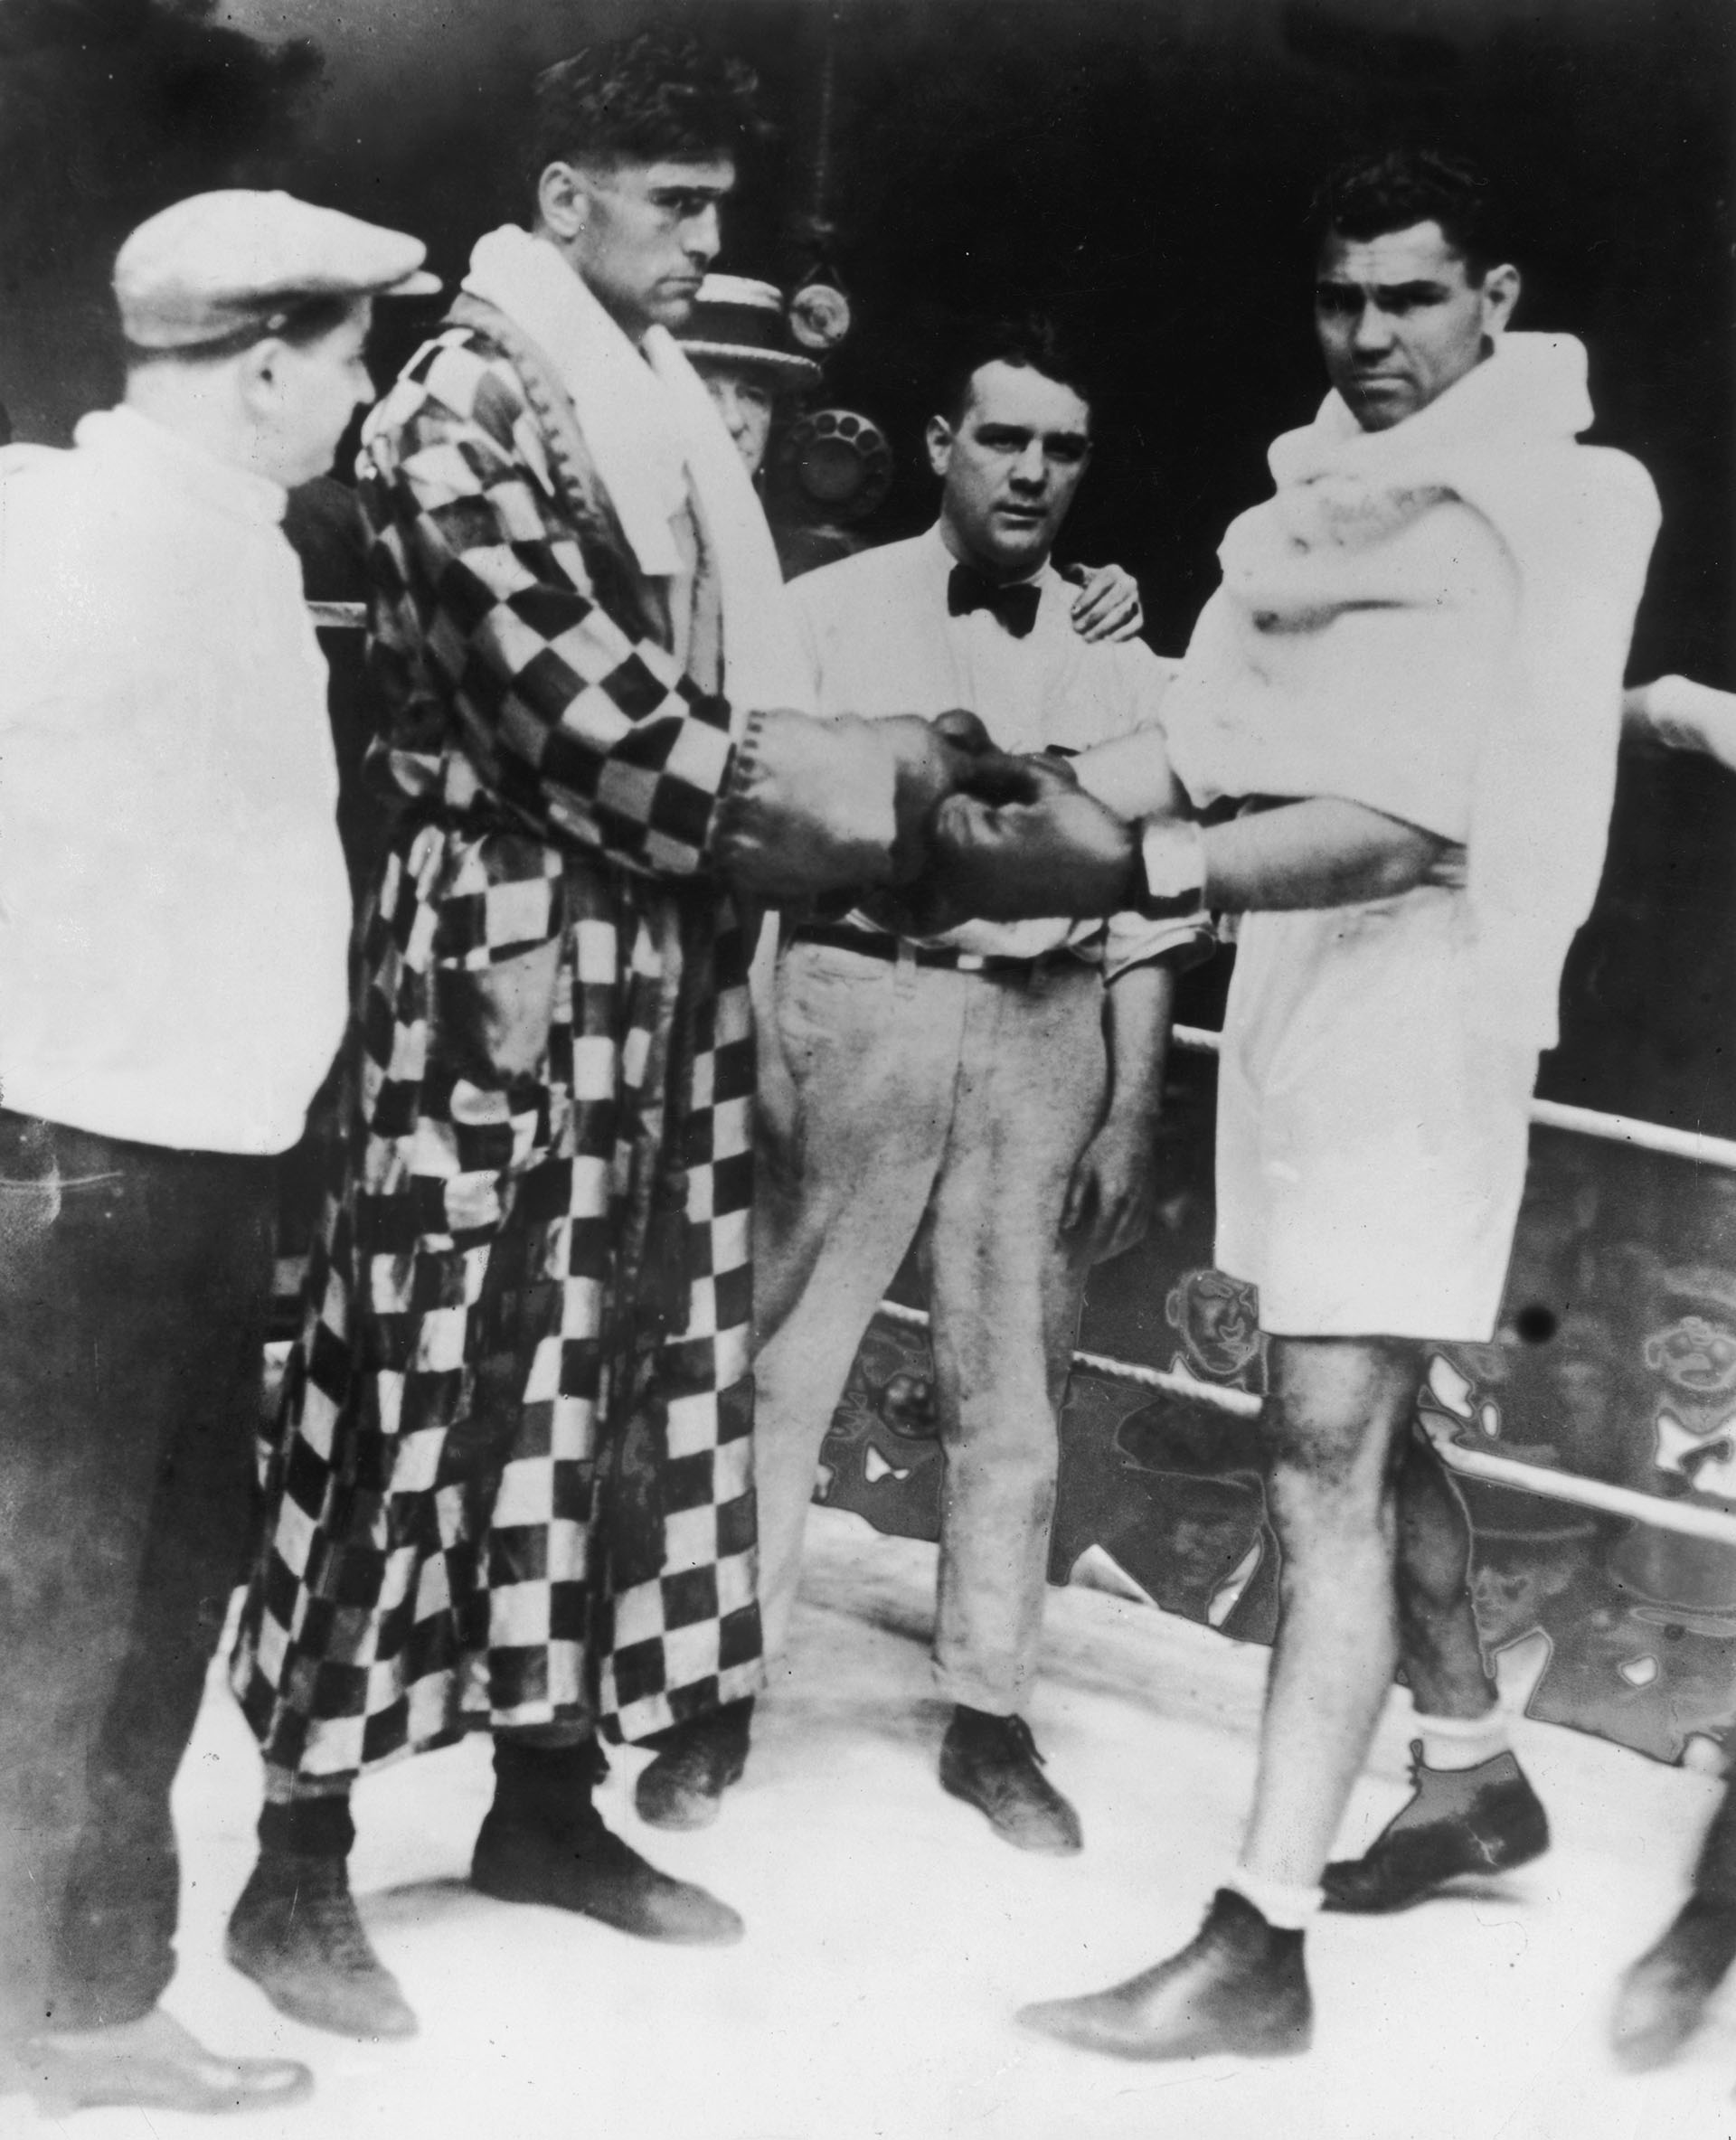  Jack Dempsey con Luis Ángel Firpo (Photo by Hulton Archive/Getty Images)